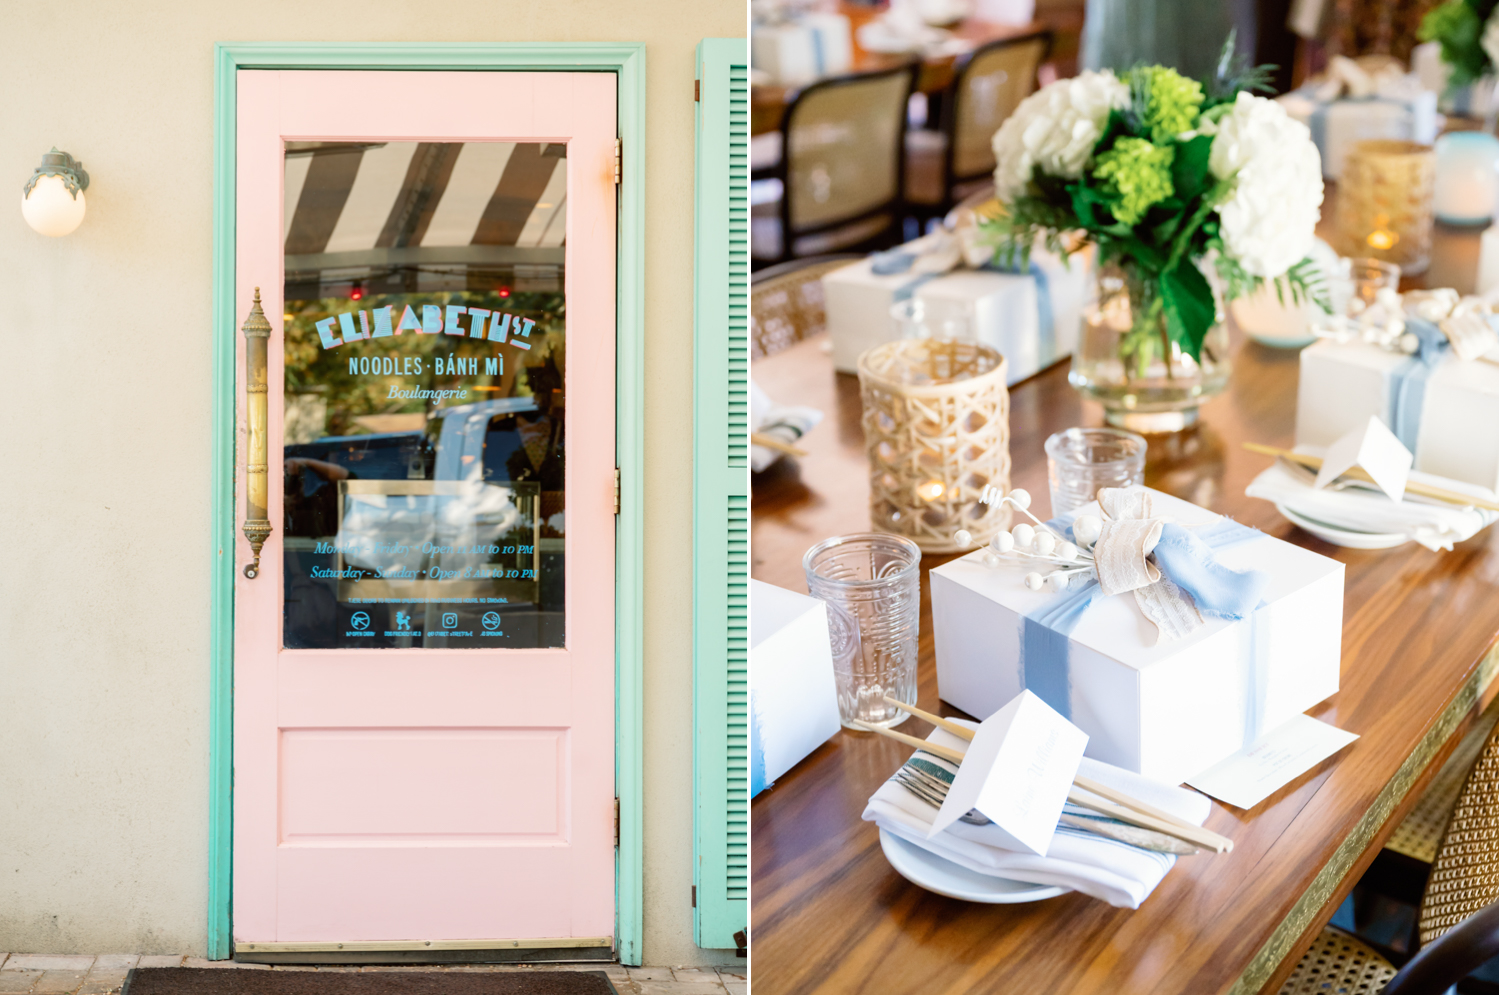 Left: The pink door of Elizabeth Street Cafe. Right: The bridal party gifts, wrapped in a white box with blue ribbon